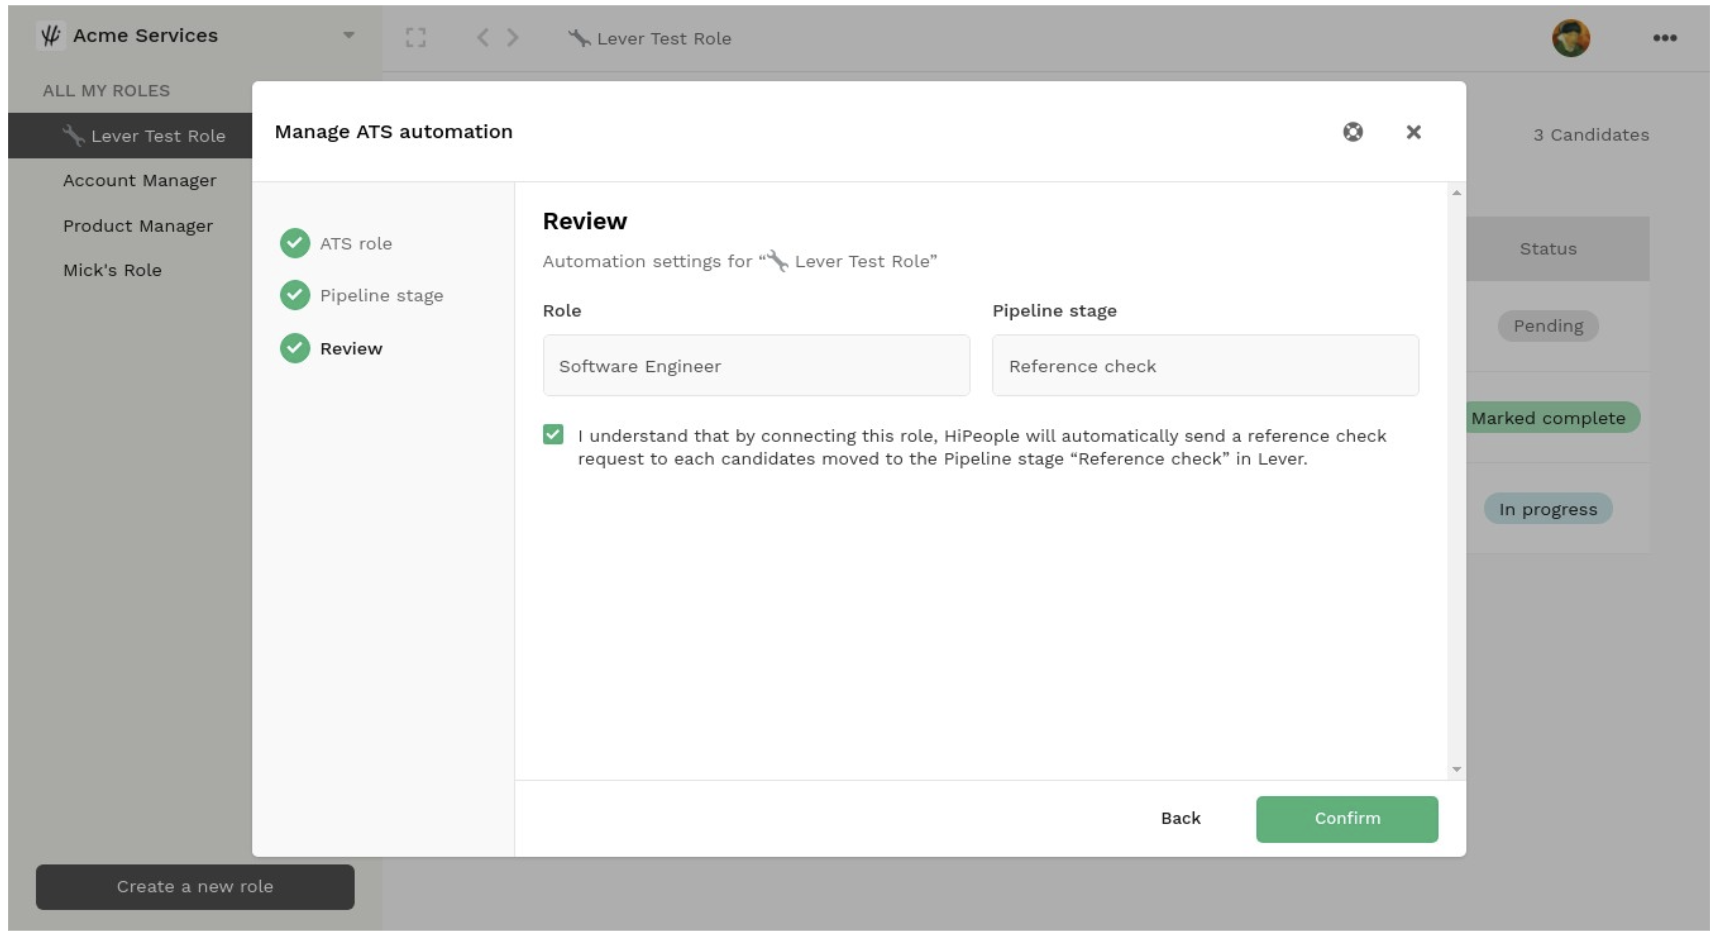 HiPeople platform review window showing role and pipeline stages and green confirm button.